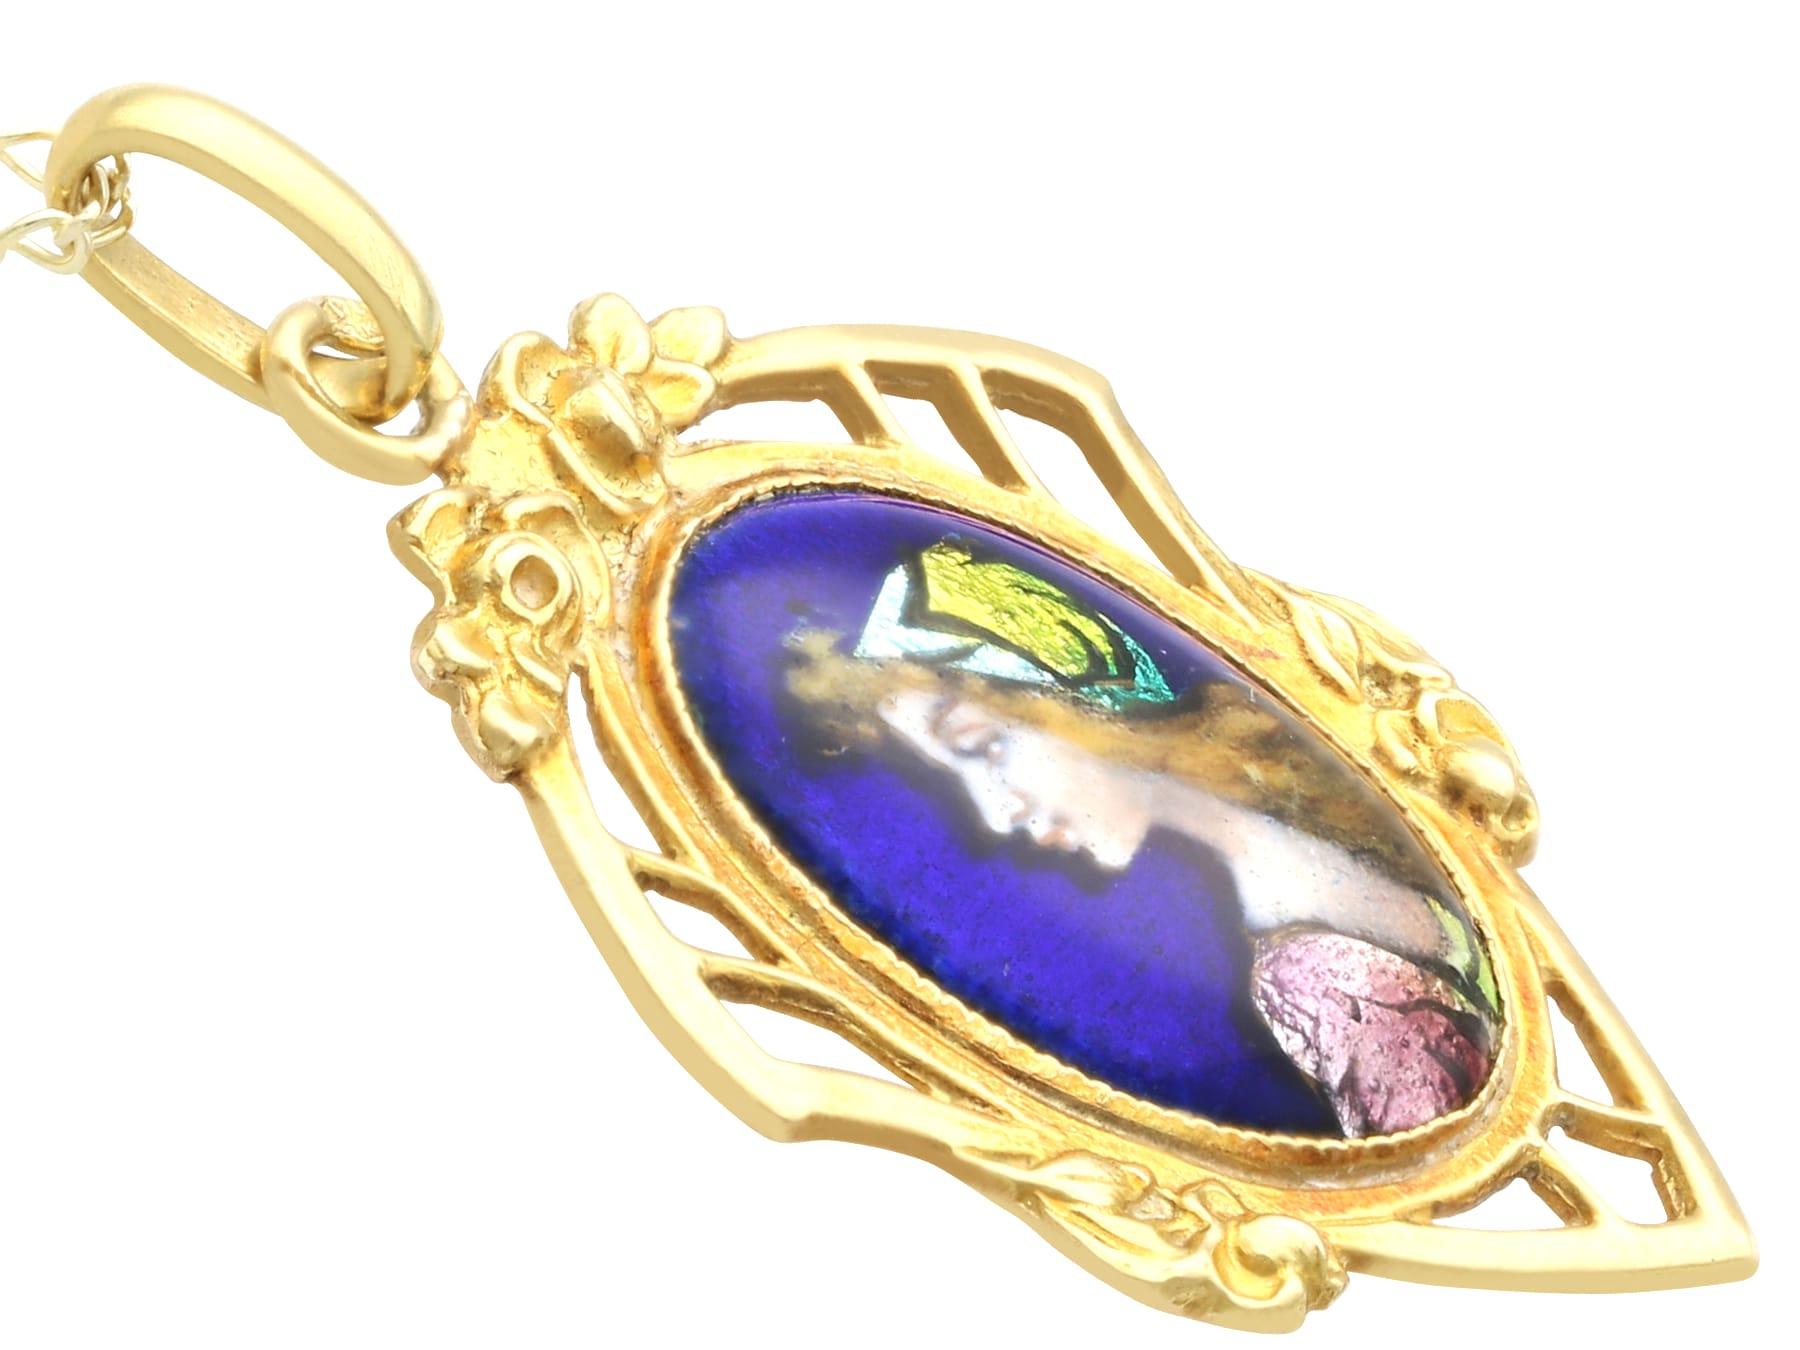 Antique French Enamel and 18k Yellow Gold Pendant In Excellent Condition For Sale In Jesmond, Newcastle Upon Tyne